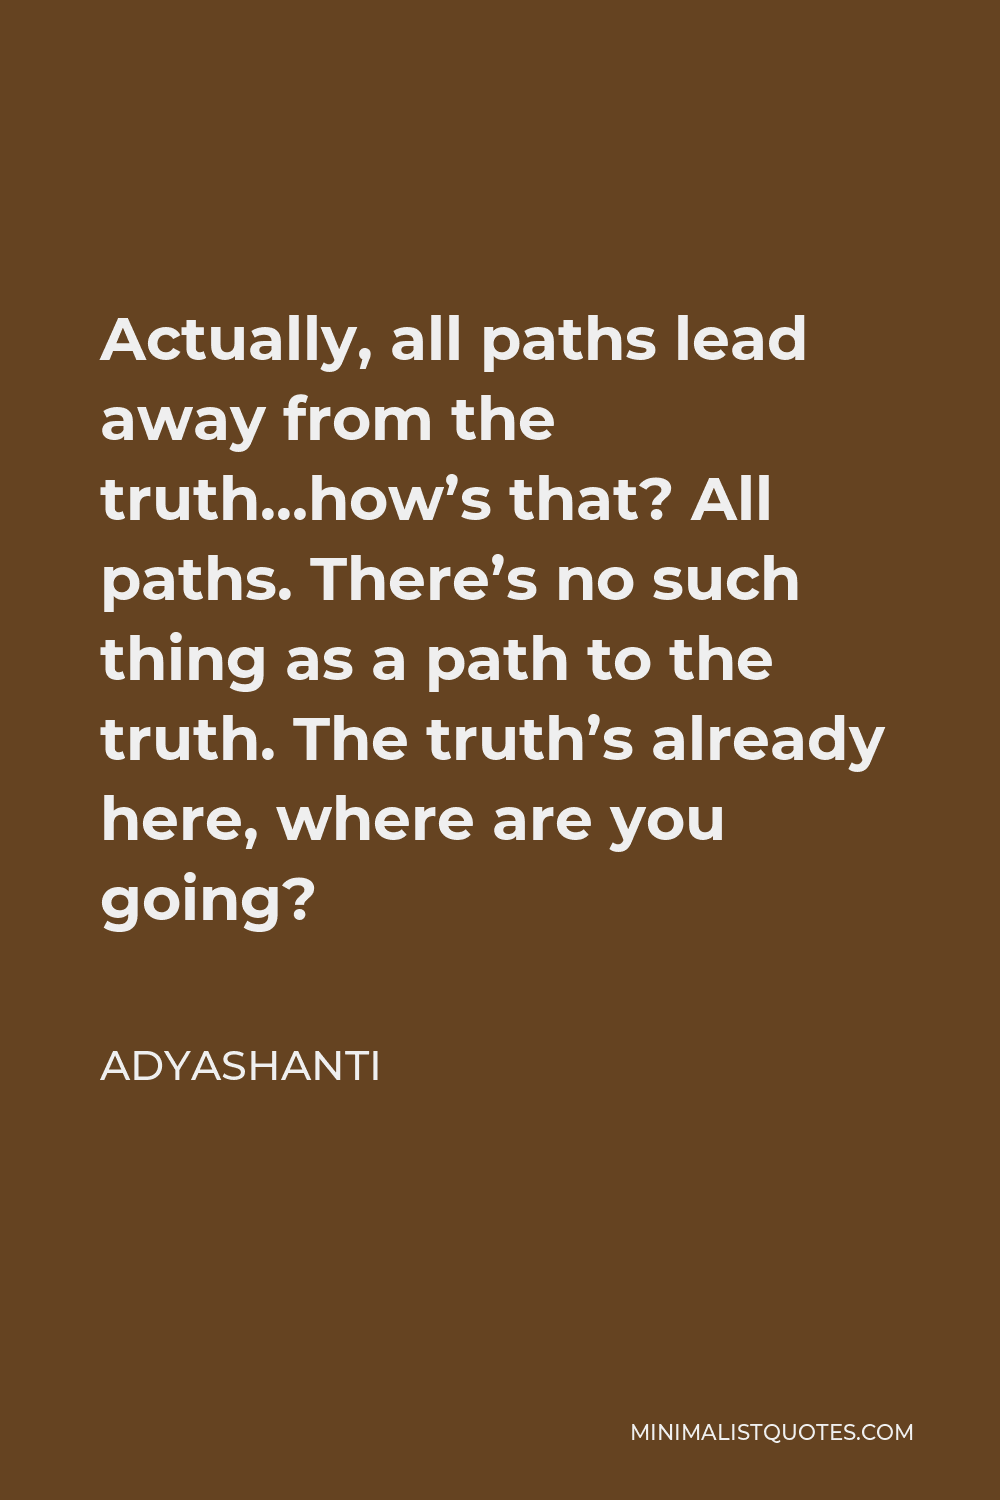 Adyashanti Quote - Actually, all paths lead away from the truth…how’s that? All paths. There’s no such thing as a path to the truth. The truth’s already here, where are you going?